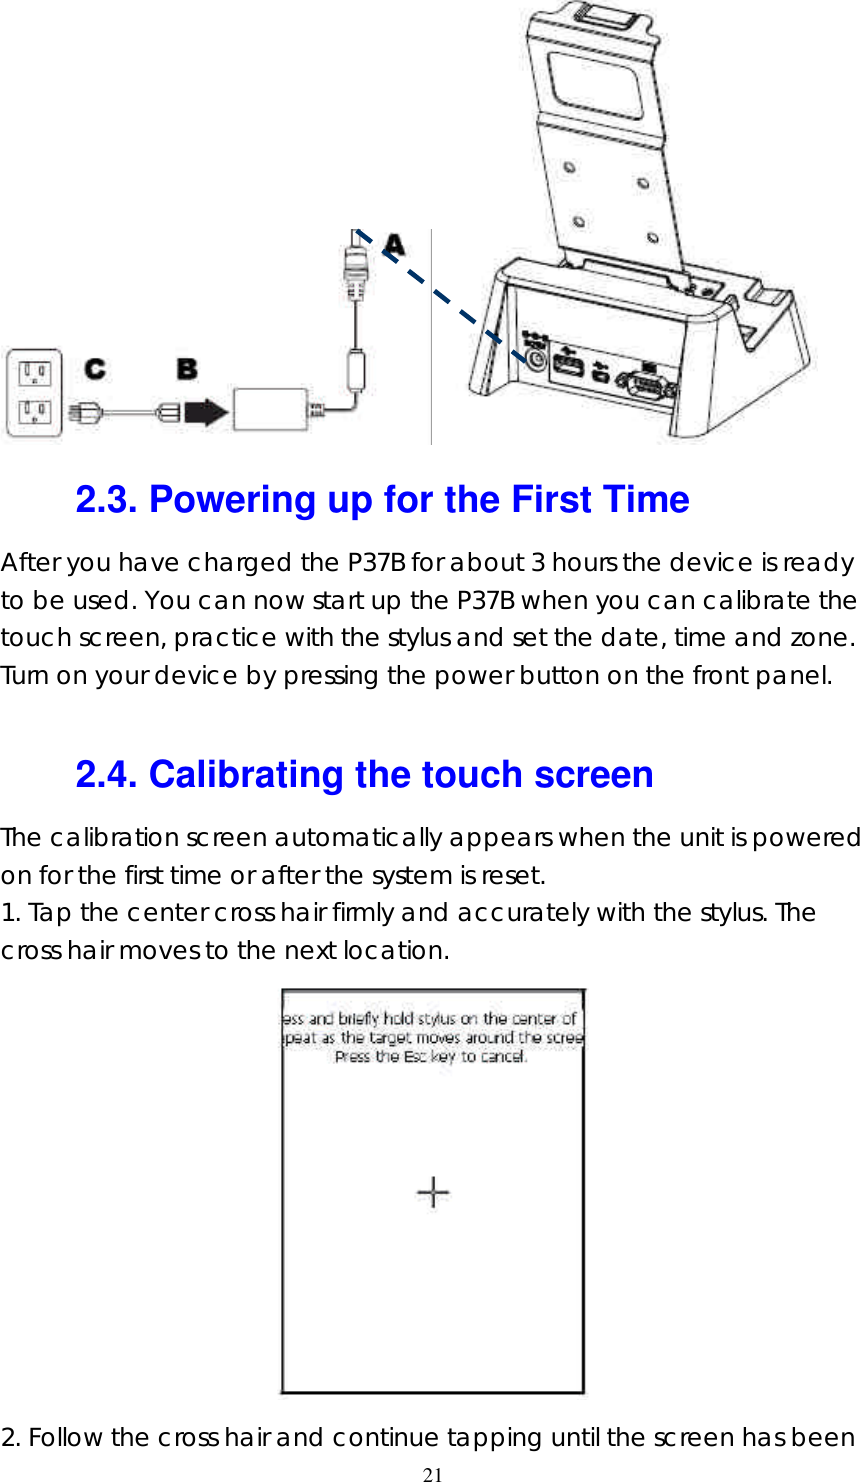  21   2.3. Powering up for the First Time After you have charged the P37B for about 3 hours the device is ready to be used. You can now start up the P37B when you can calibrate the touch screen, practice with the stylus and set the date, time and zone. Turn on your device by pressing the power button on the front panel.  2.4. Calibrating the touch screen The calibration screen automatically appears when the unit is powered on for the first time or after the system is reset. 1. Tap the center cross hair firmly and accurately with the stylus. The cross hair moves to the next location.  2. Follow the cross hair and continue tapping until the screen has been 